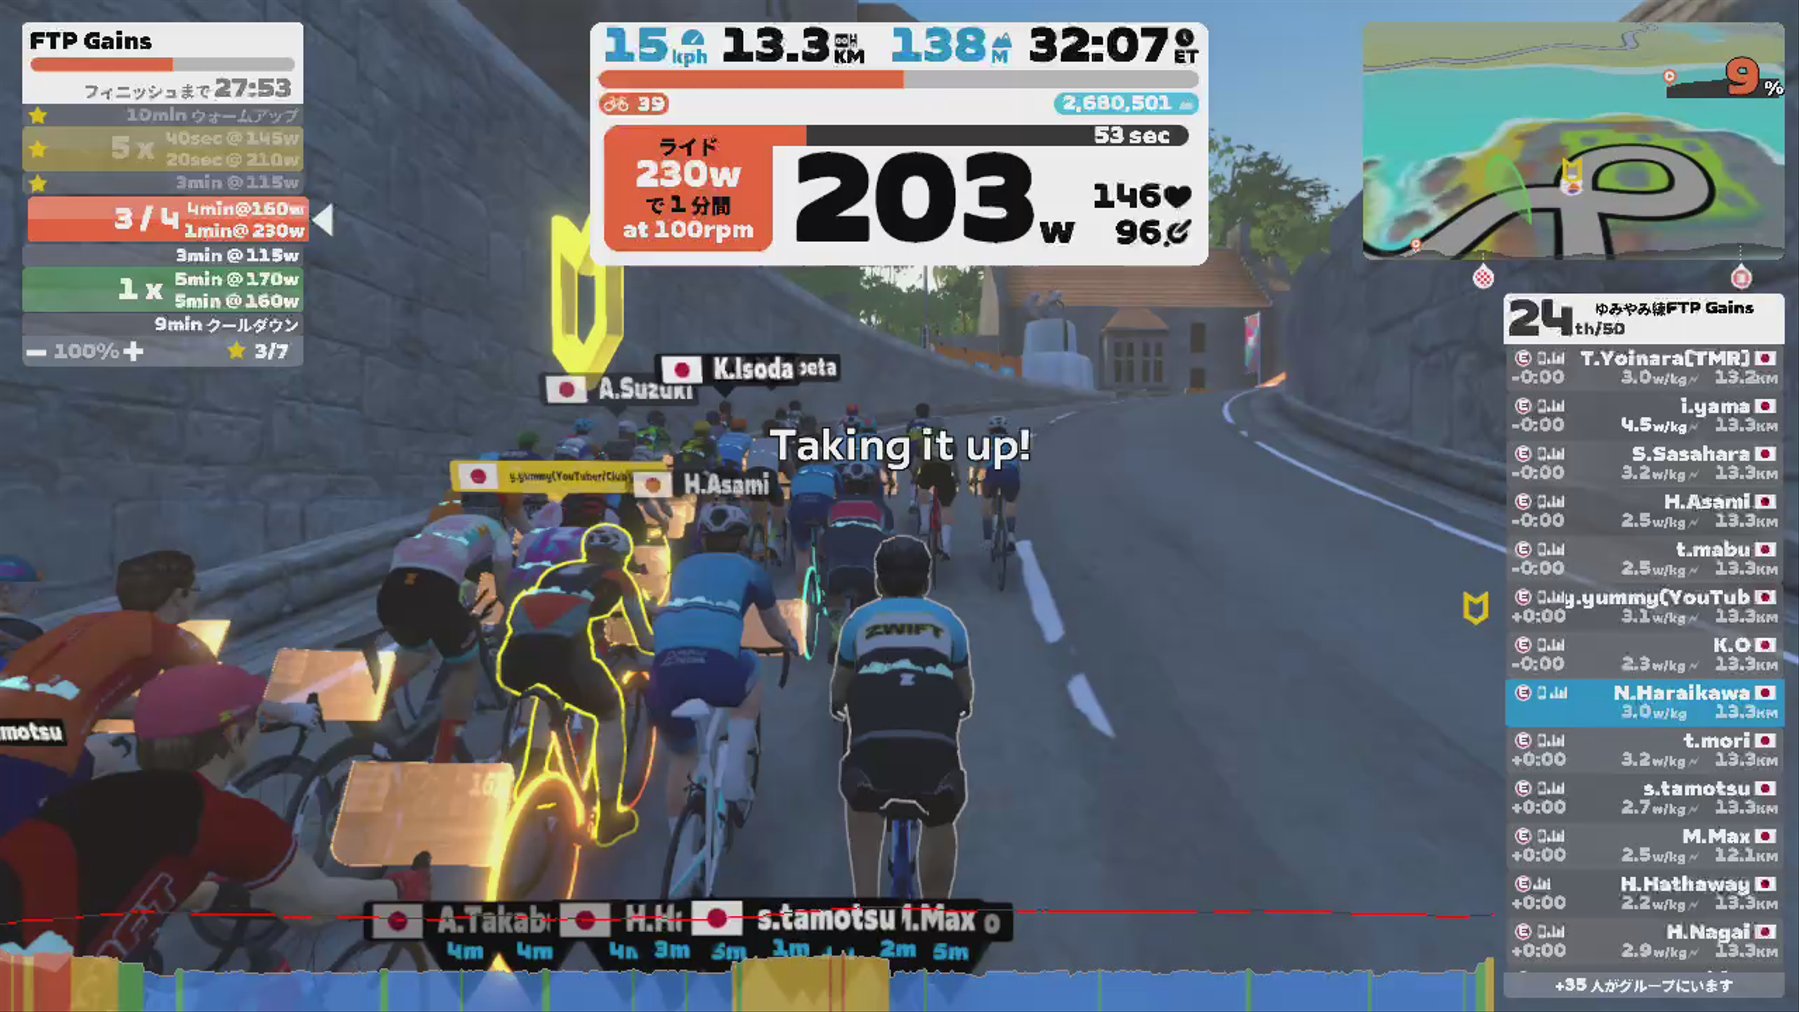 Zwift - Group Workout: ゆみやみ練FTP Gains on The Muckle Yin in Scotland